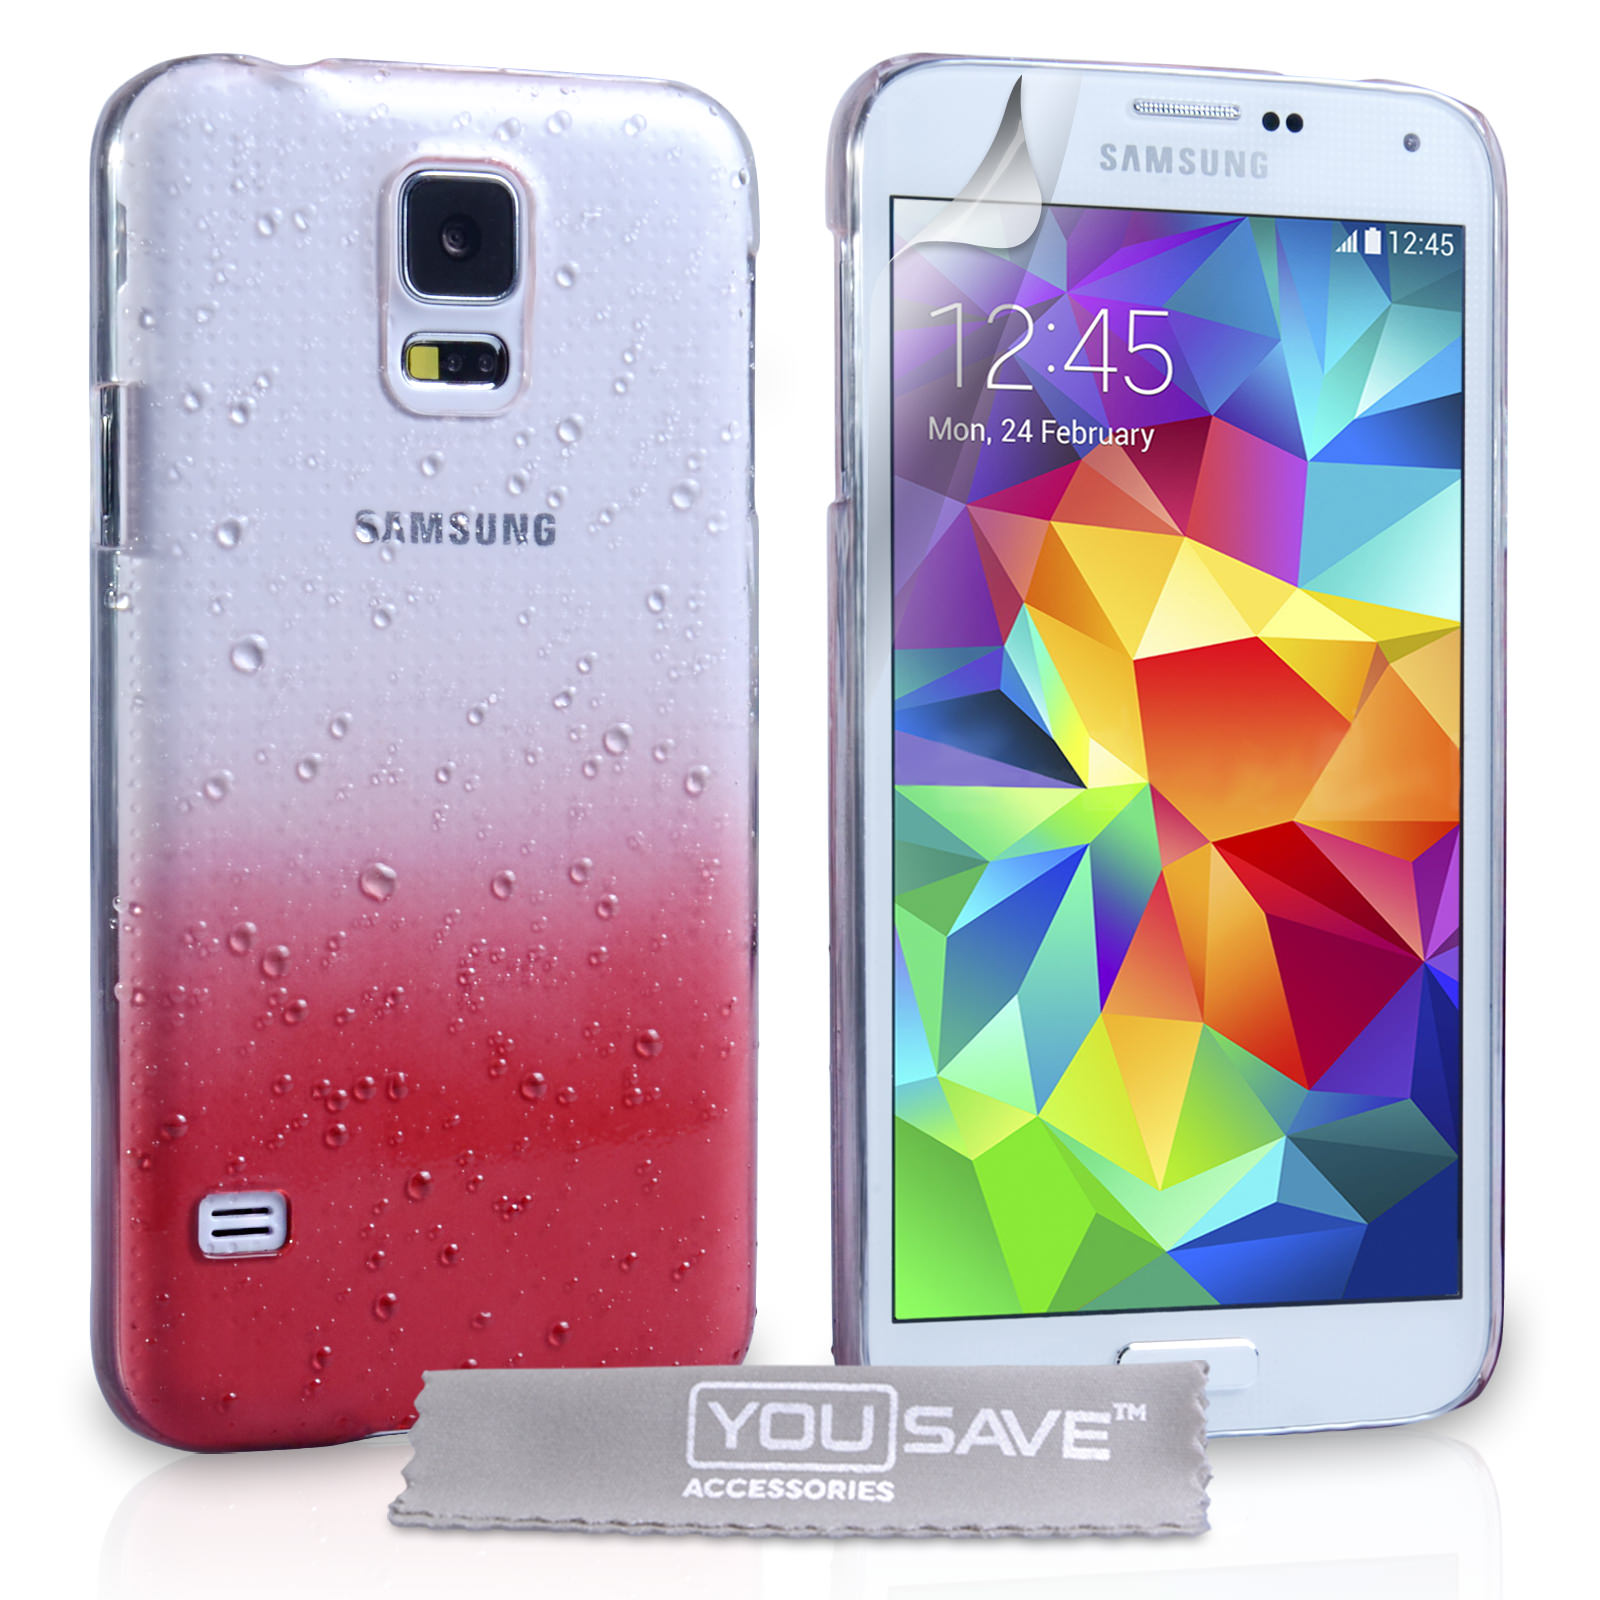 YouSave Accessories Samsung Galaxy S5 Raindrop Hard Case - Red-Clear